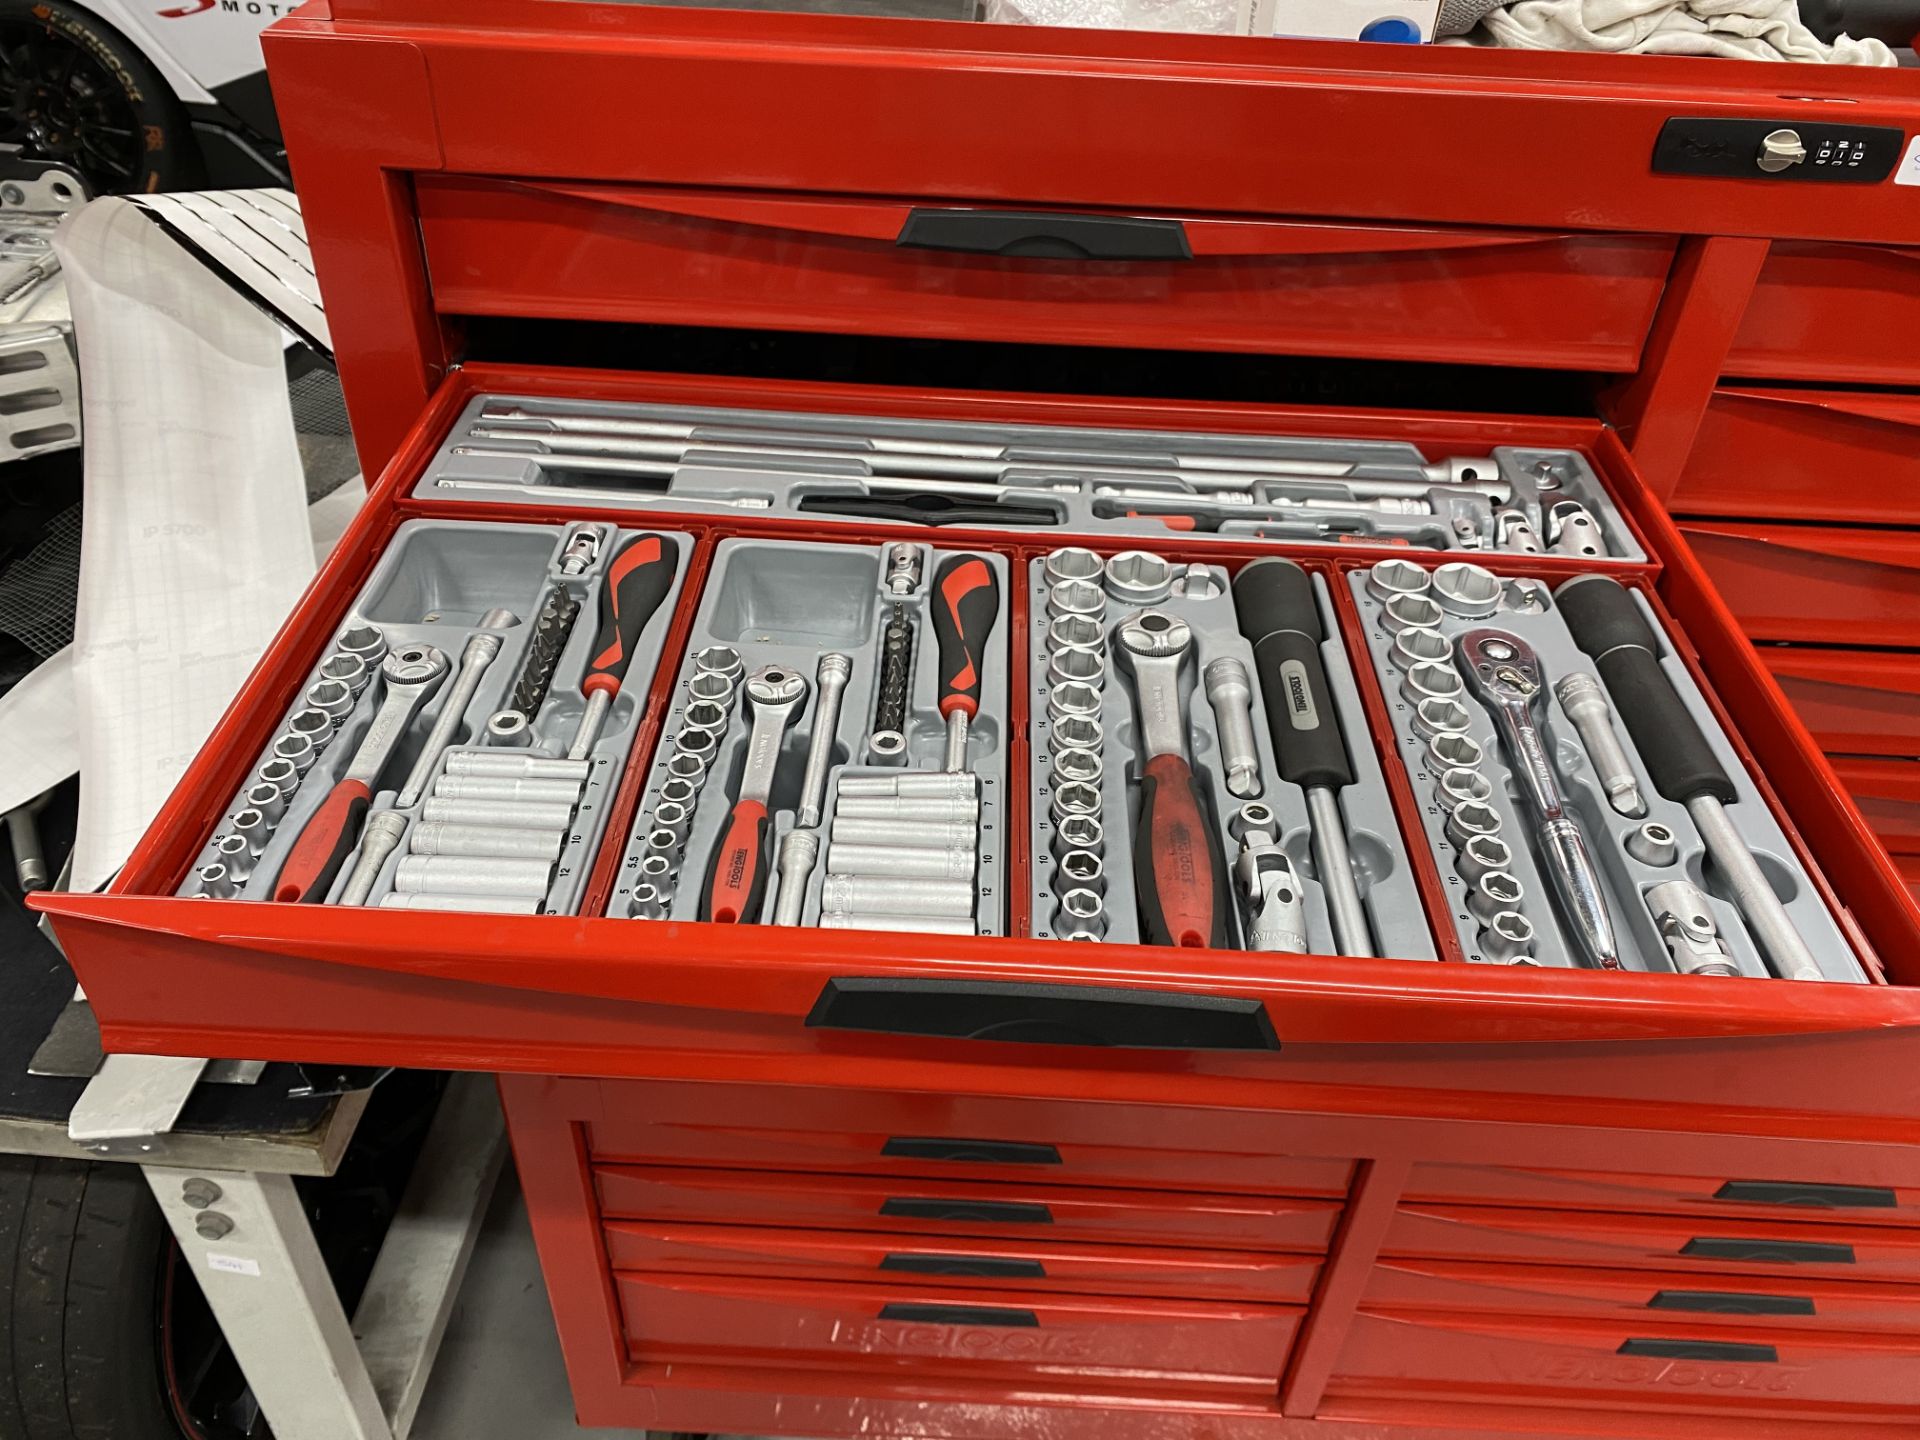 Tengtool box code CMONSTER-02, mobile 9 drawer toolbox with a 10 drawer top box toolbox, including - Image 4 of 21